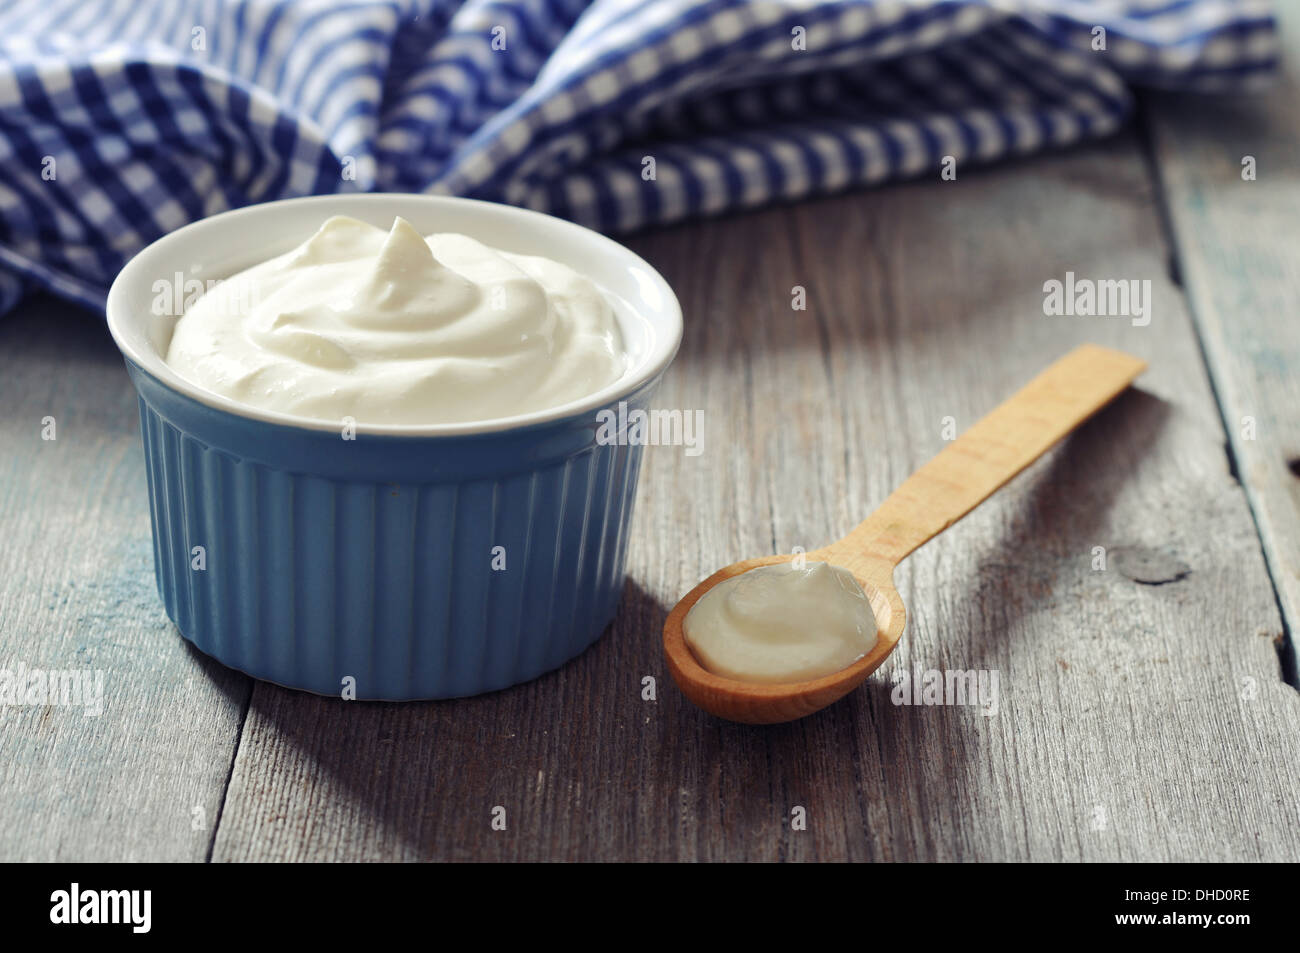 Greek yogurt in a ceramic bowl with spoons on wooden background Stock Photo